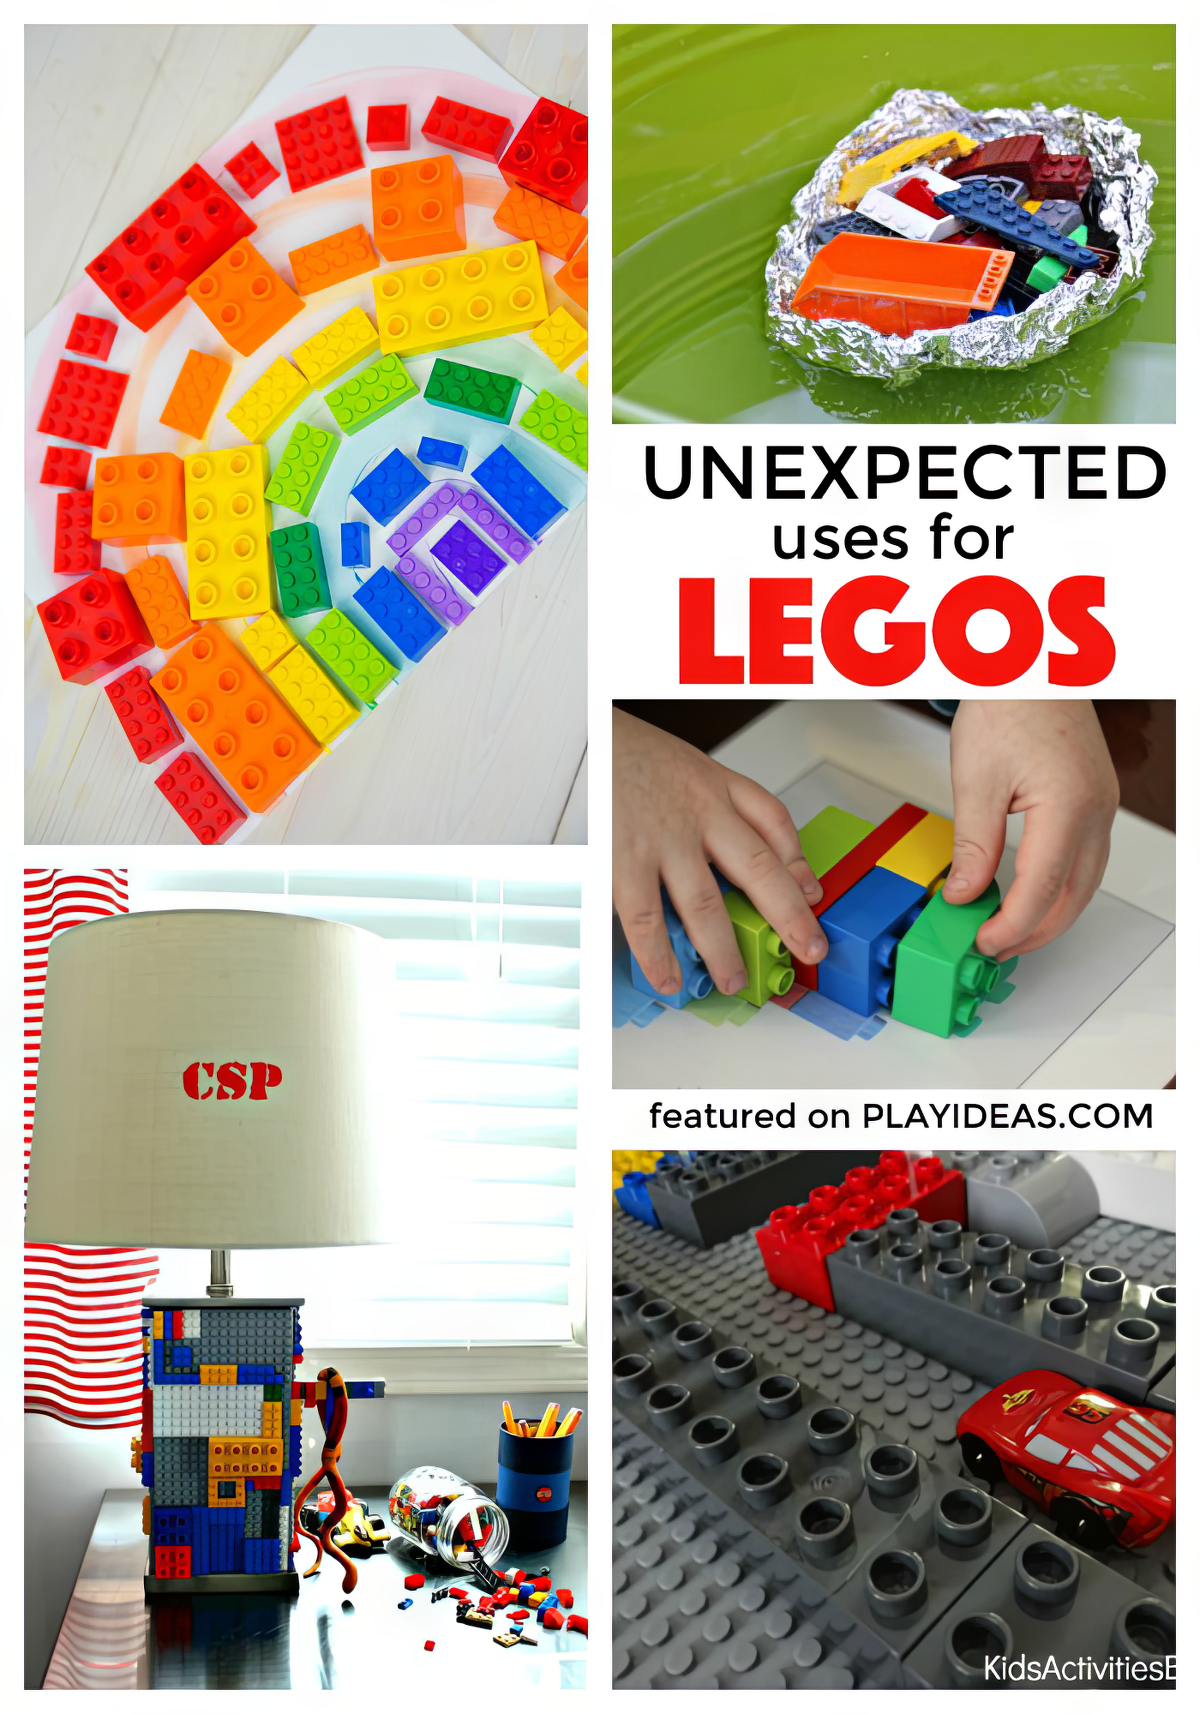 Uses-for-Legos, creative ways to play with lego